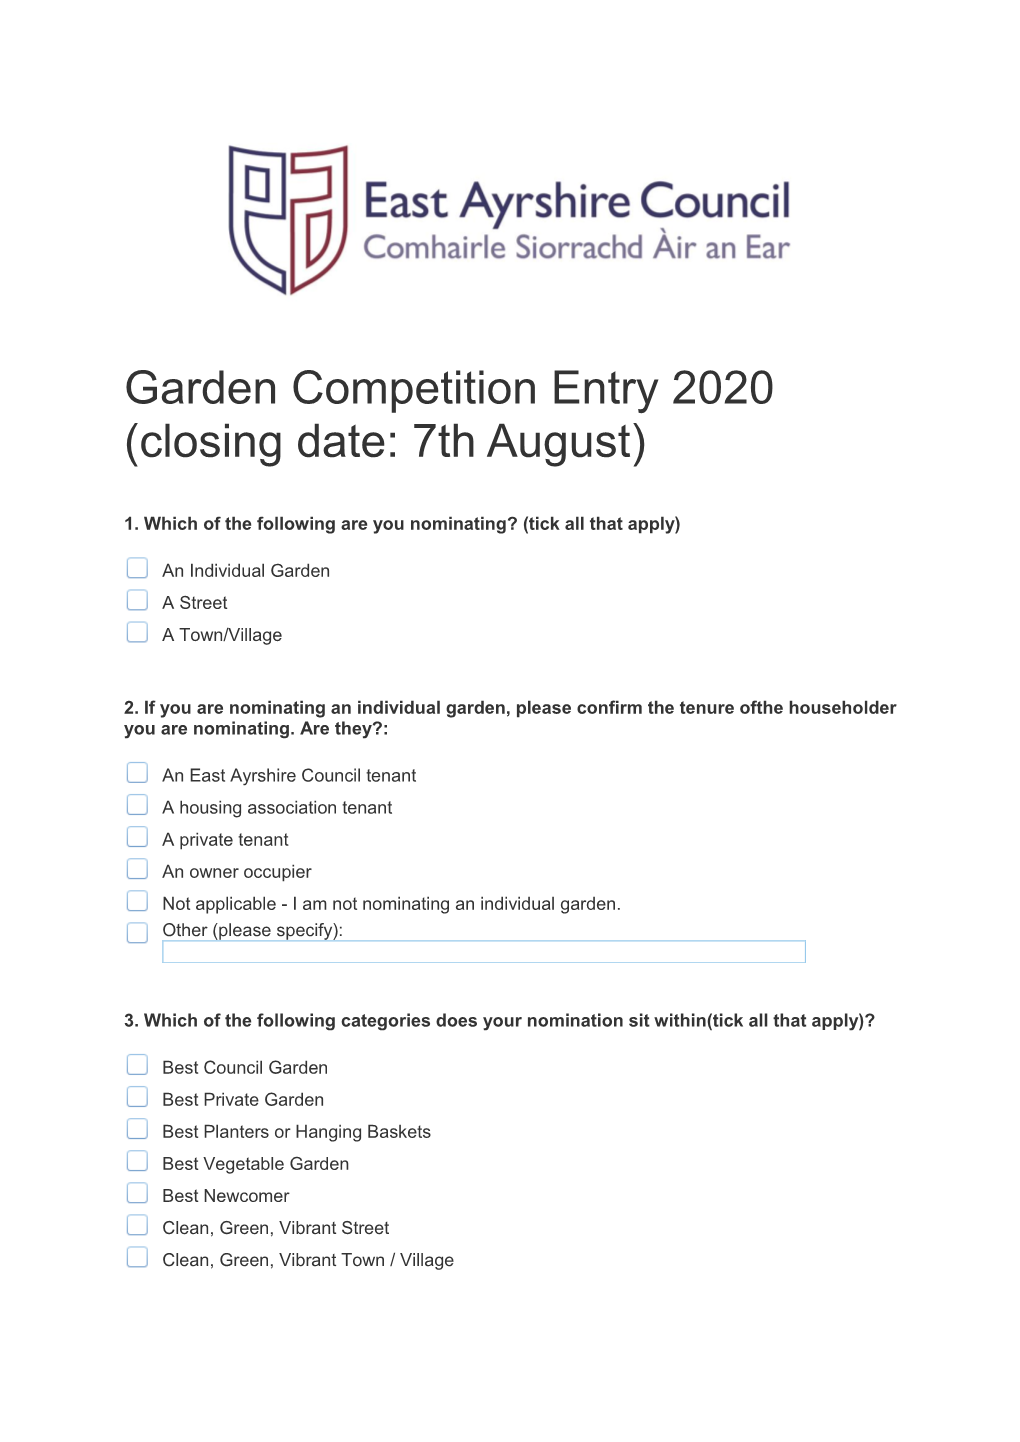 Garden Competition Form